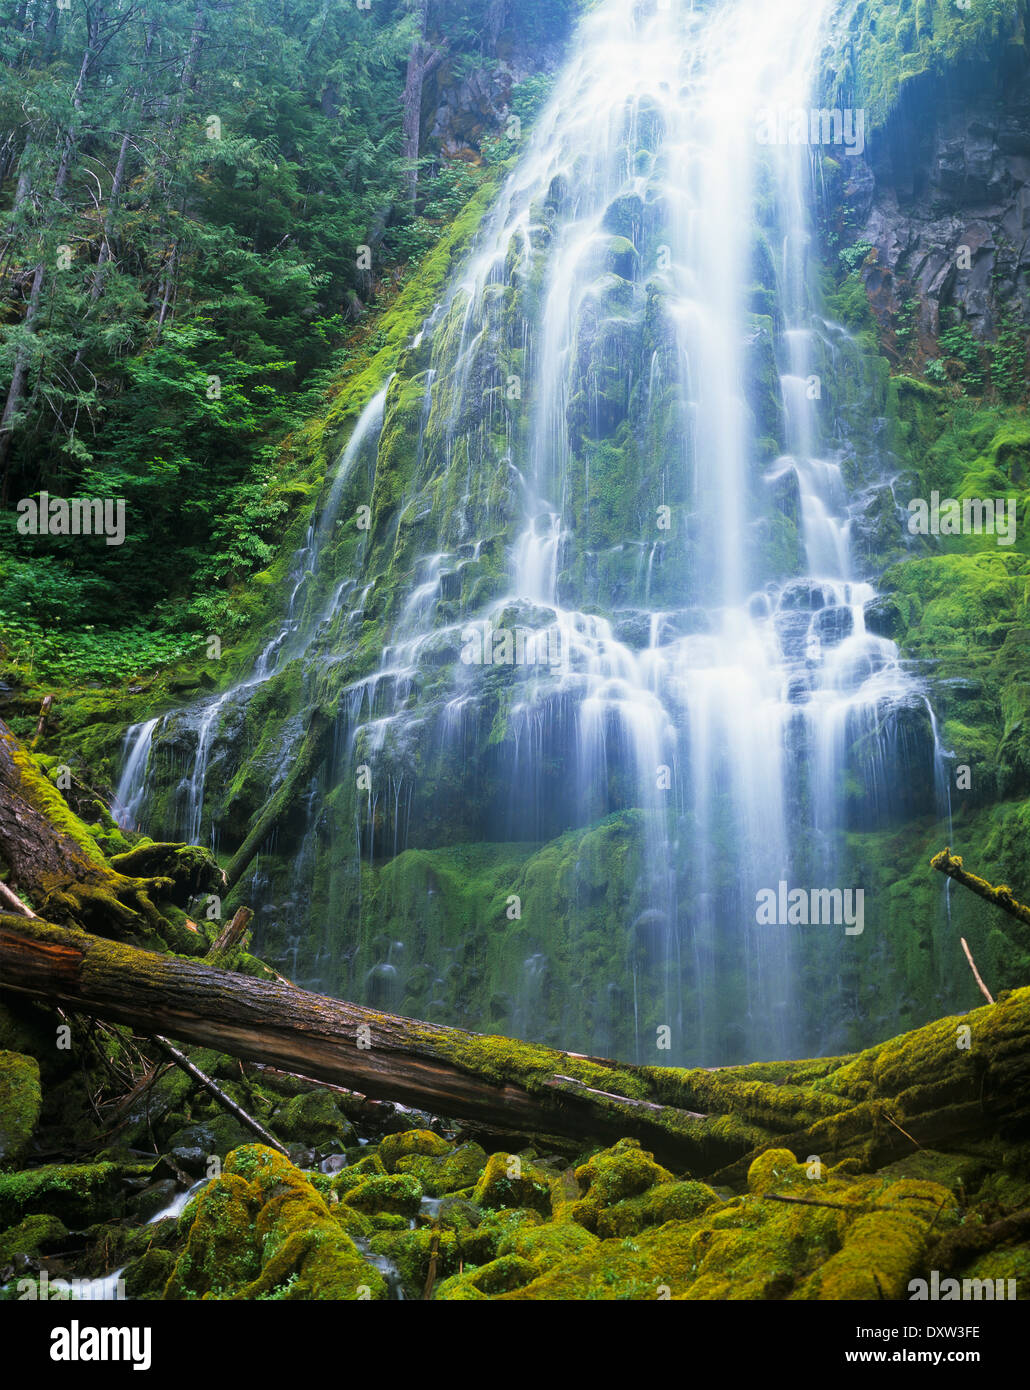 Proxy Falls plummets down the bluffs; Sisters, Oregon, United States of America Stock Photo